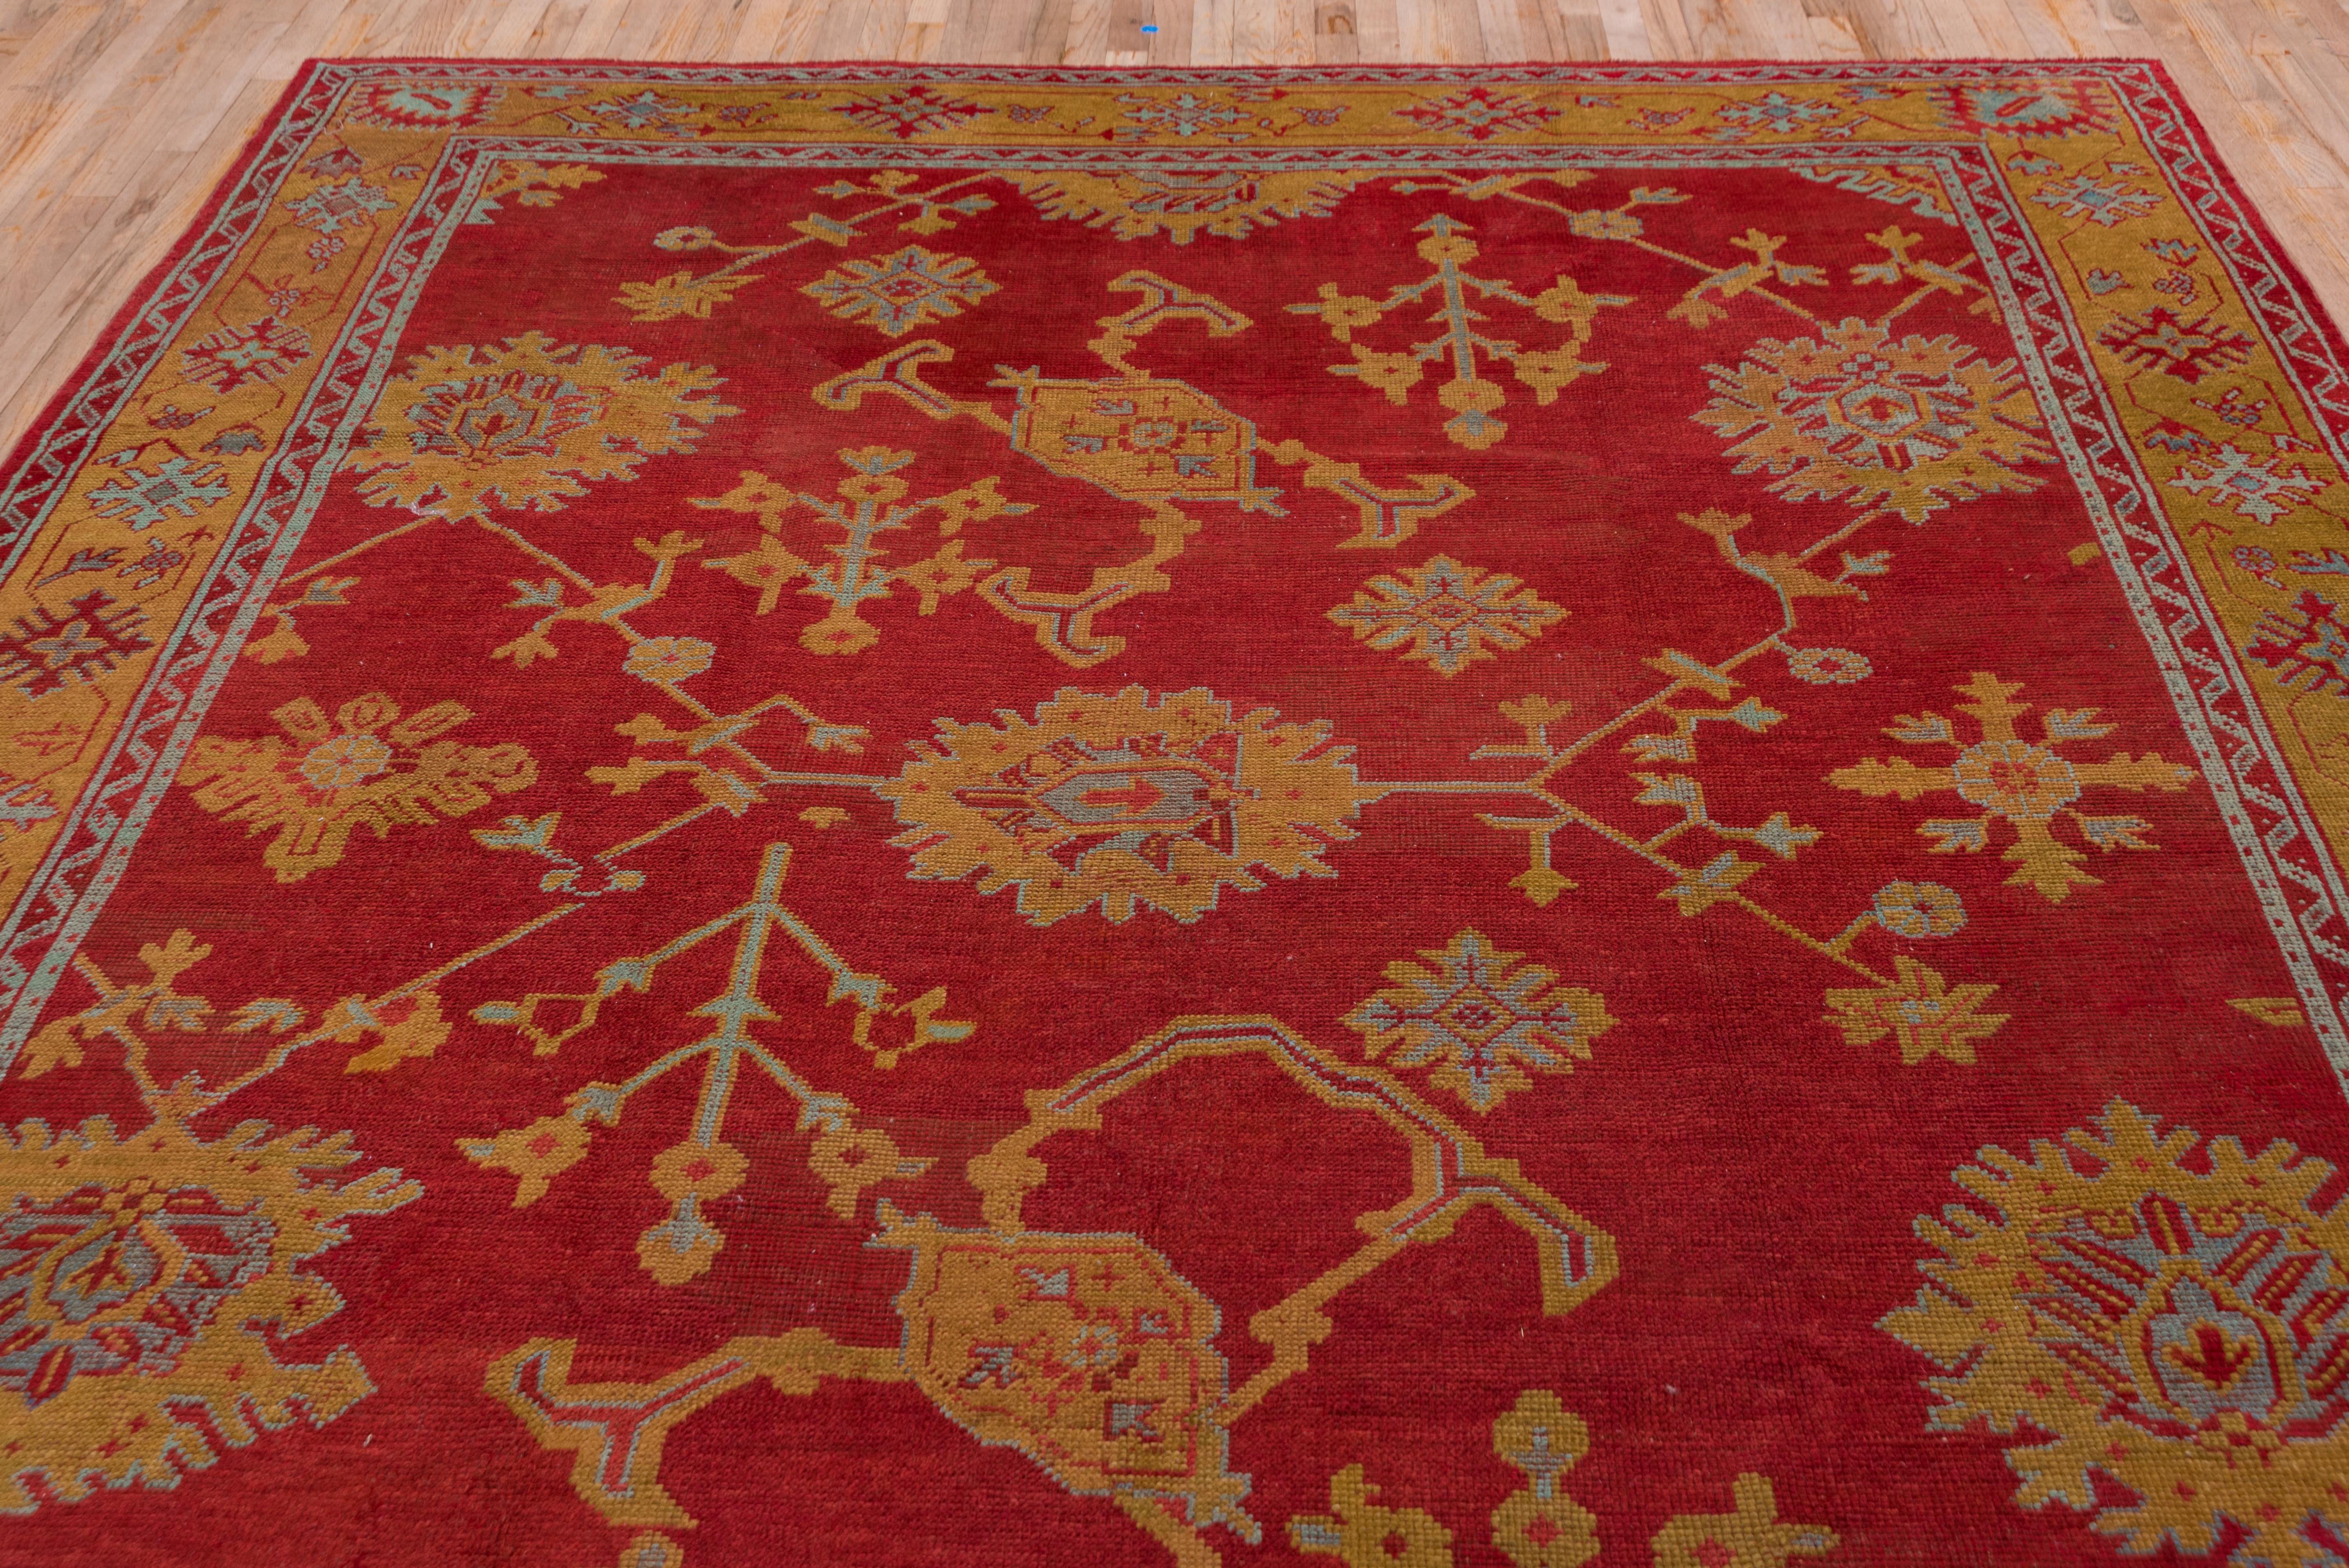 Early 20th Century Antique Turkish Red Oushak Carpet, Yellow Borders, circa 1910s For Sale